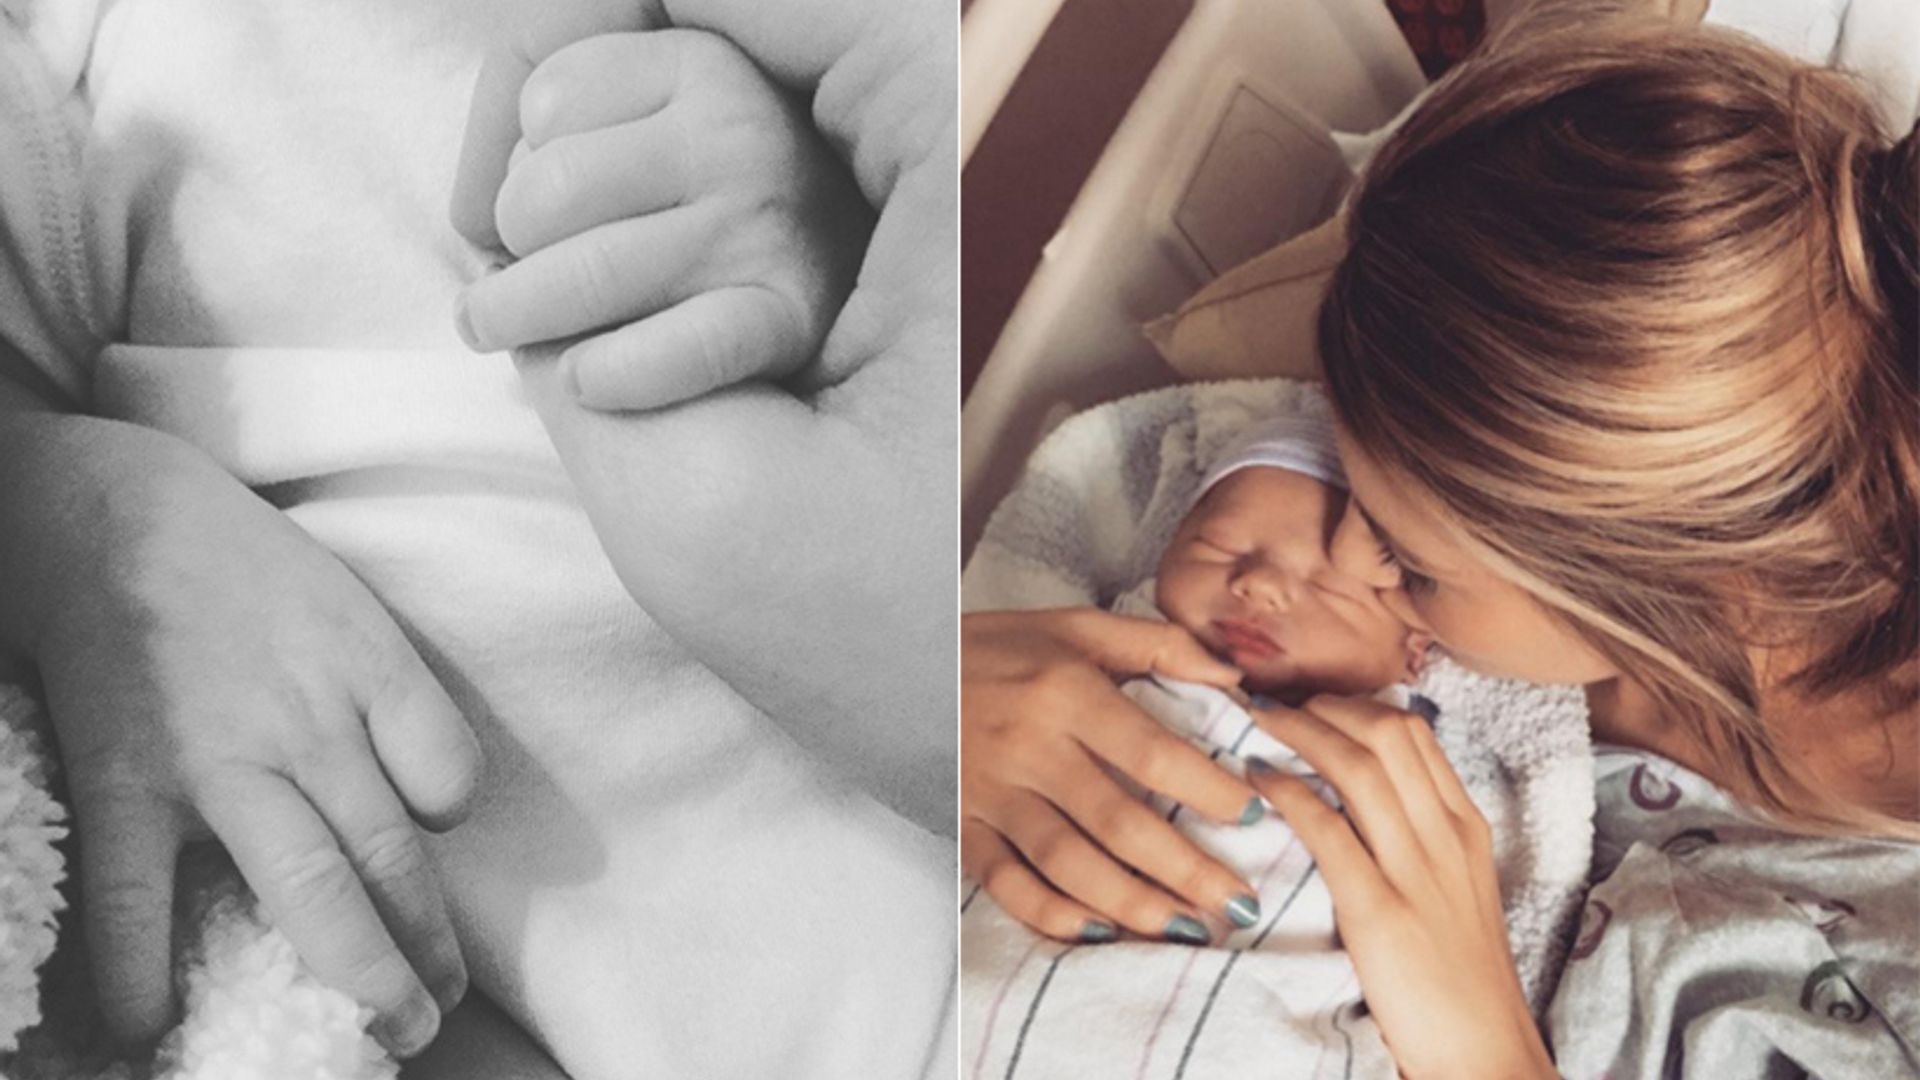 Briana Jungwirth defends her right to share photos of son Freddie